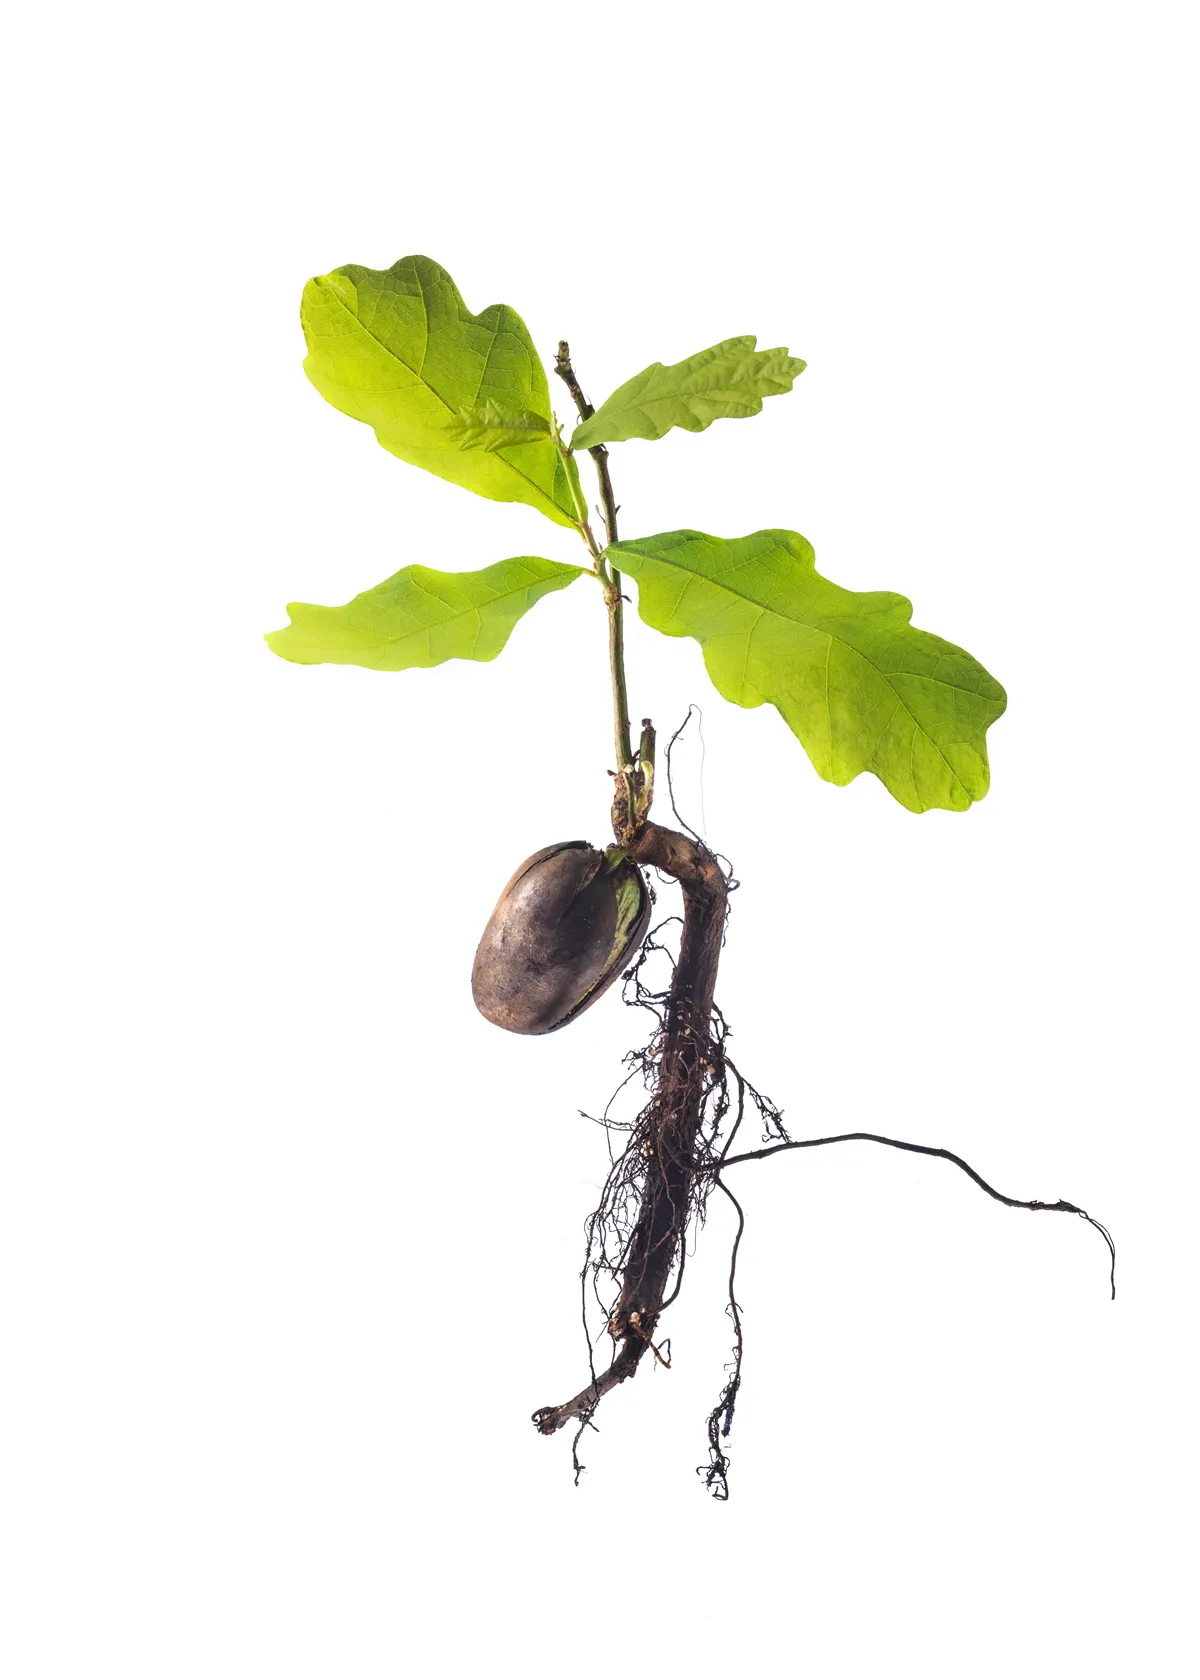 Sprout a young oak tree on white background. Acorn with roots and leaves. Oak seedling with roots on an isolated white background. High resolution